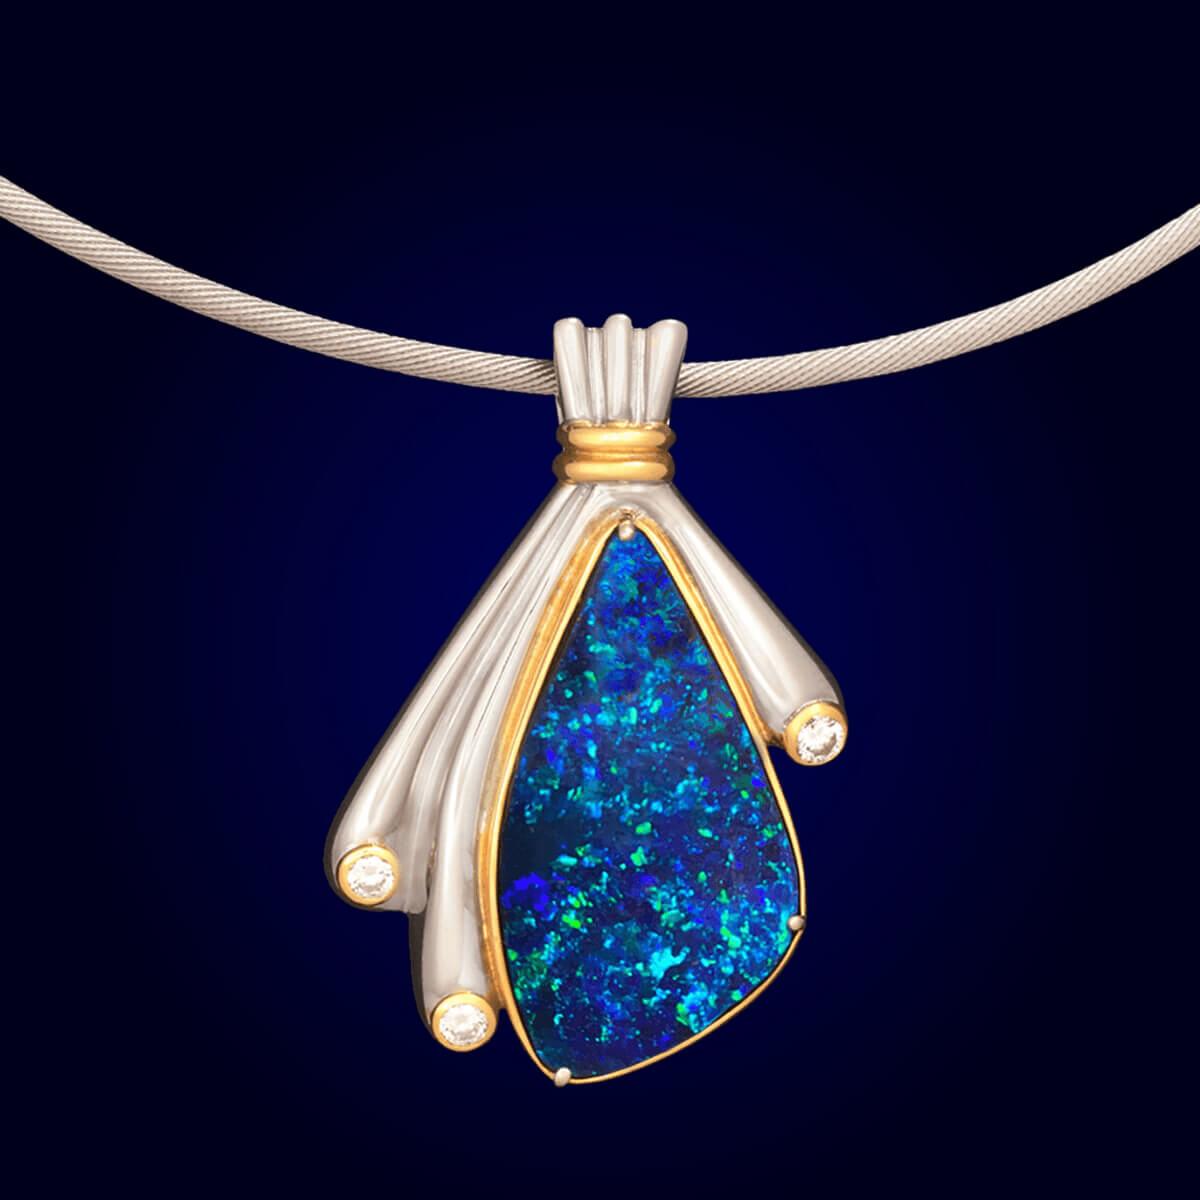 This stunning piece is a very unique solid Australian Boulder Opal. Deep mysterious blues and greens draw you into the stone that seems to go on forever. Set with high jewellery grade diamonds, solid platinum and 18K gold, this pendant is a